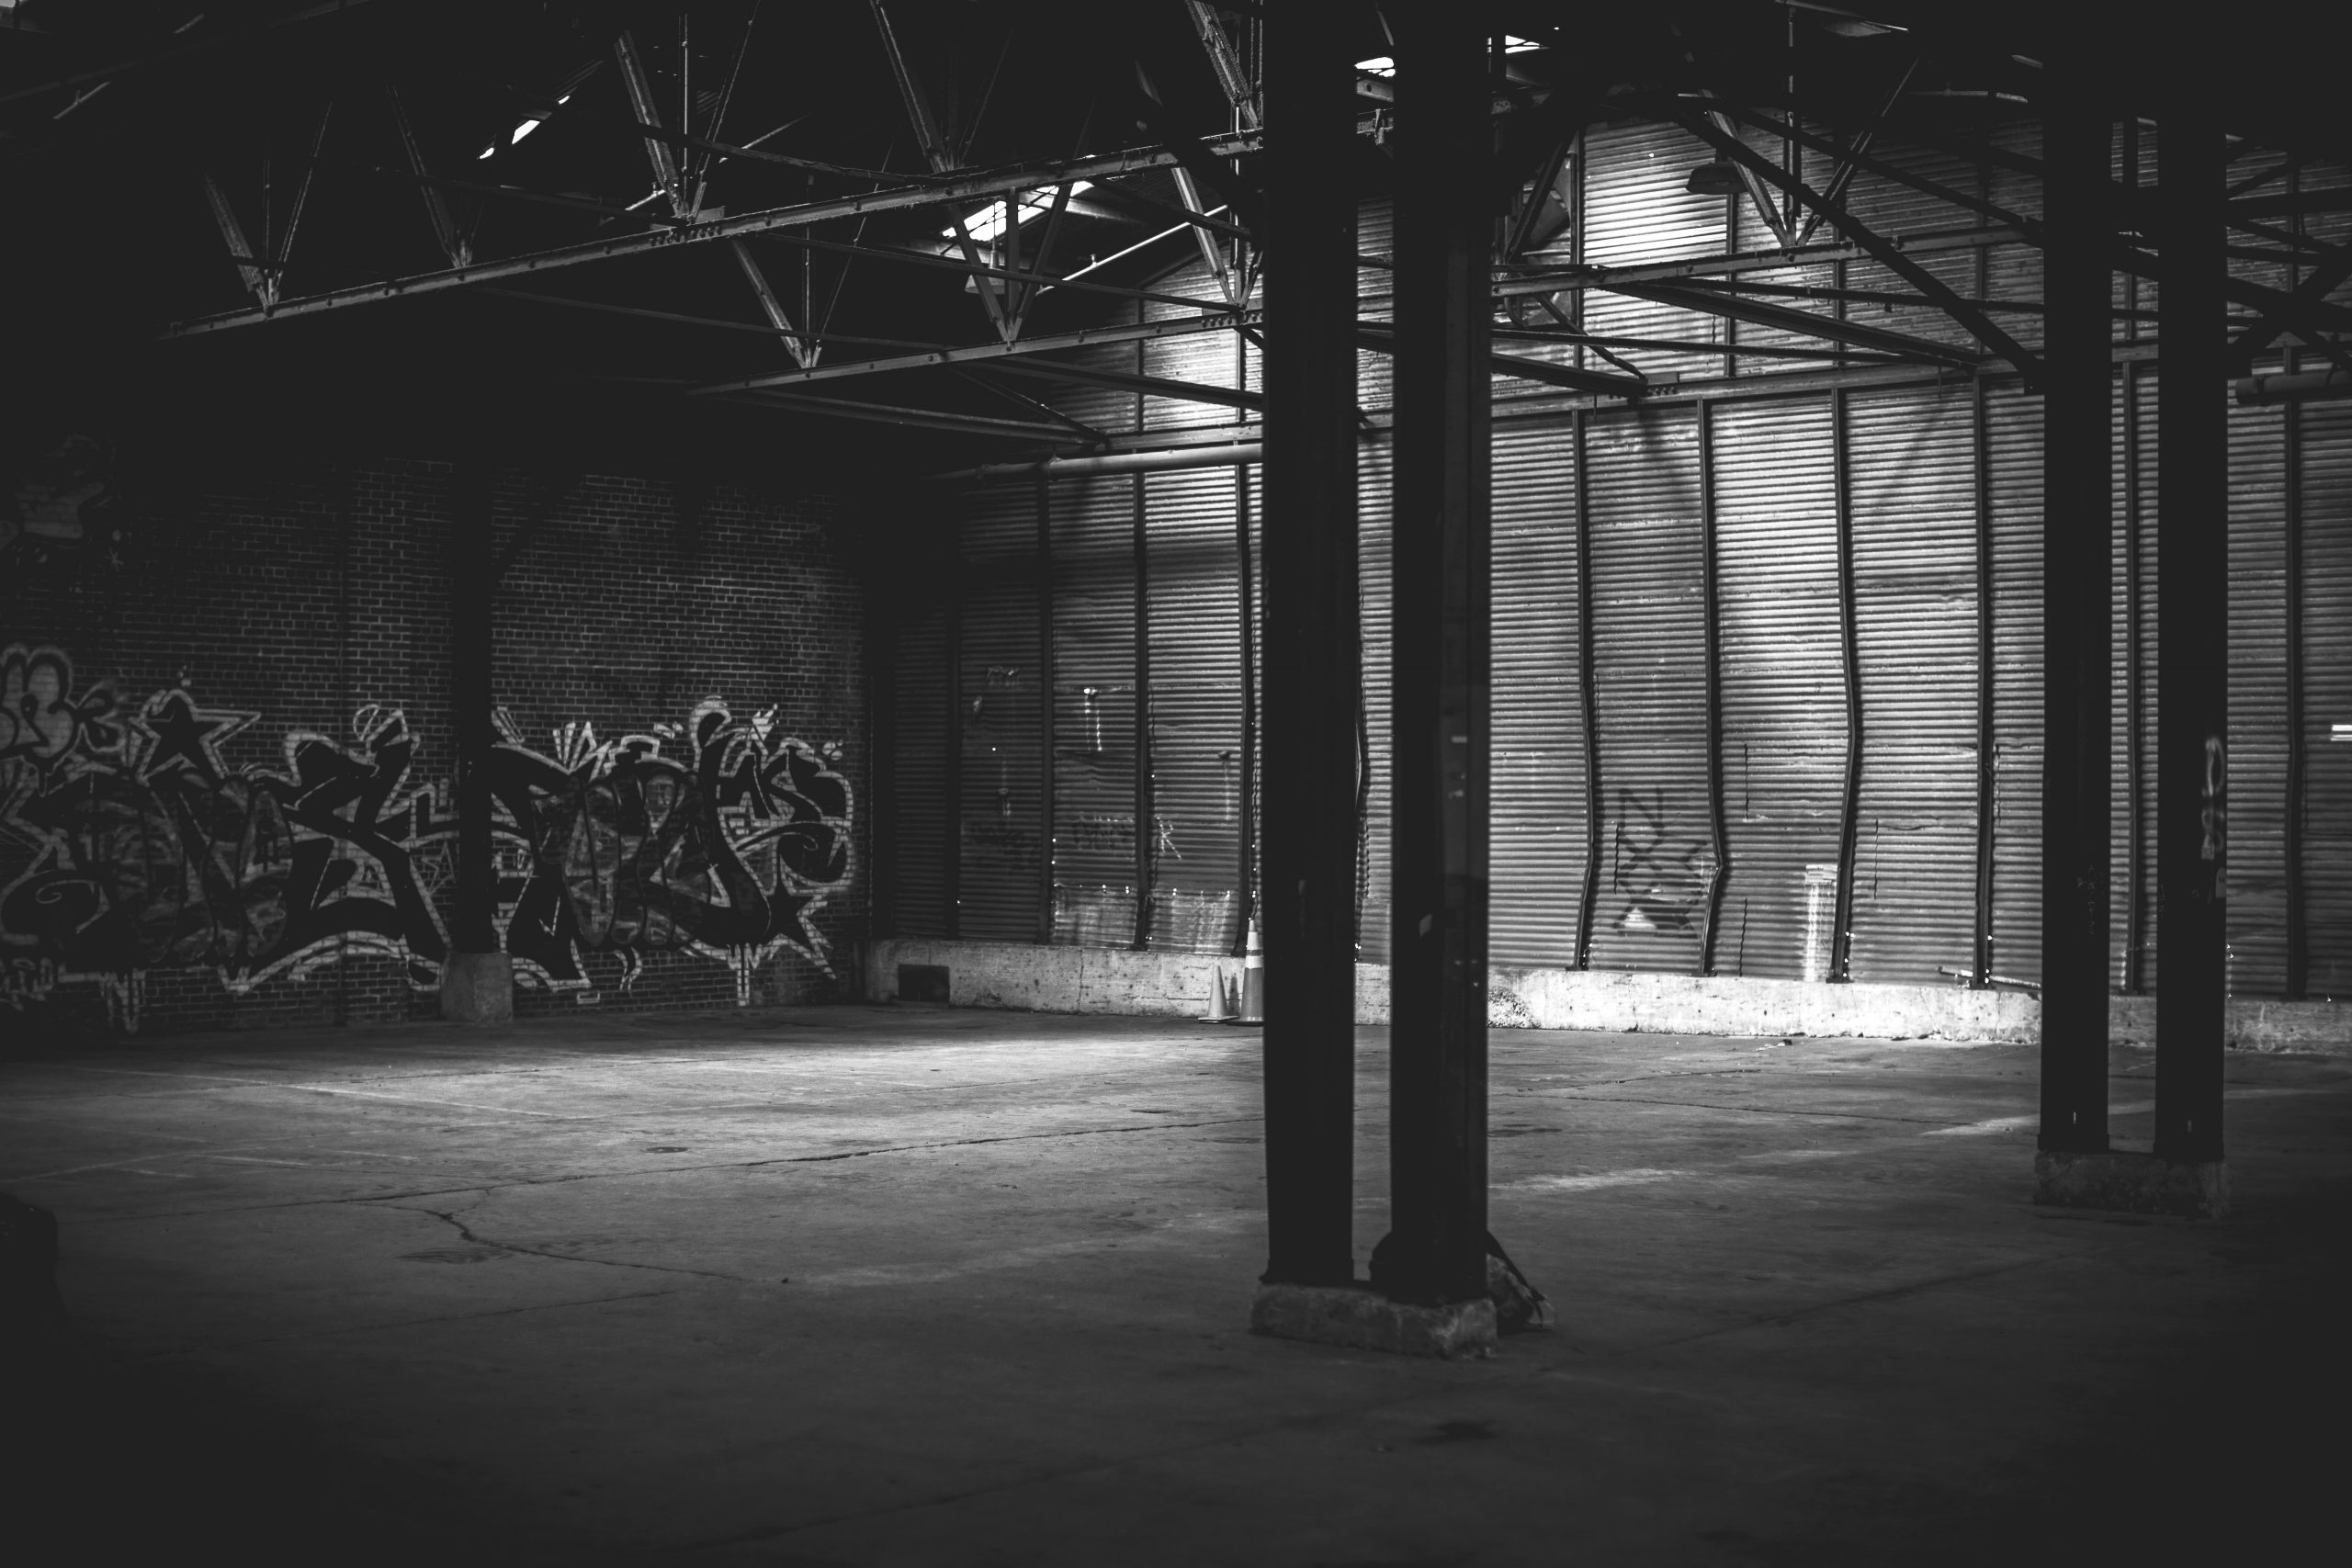 A great warehouse facility being used as a set of a music video. There are so man angles and corners to use, that with enough creativity, the shooting possibilities are endless.